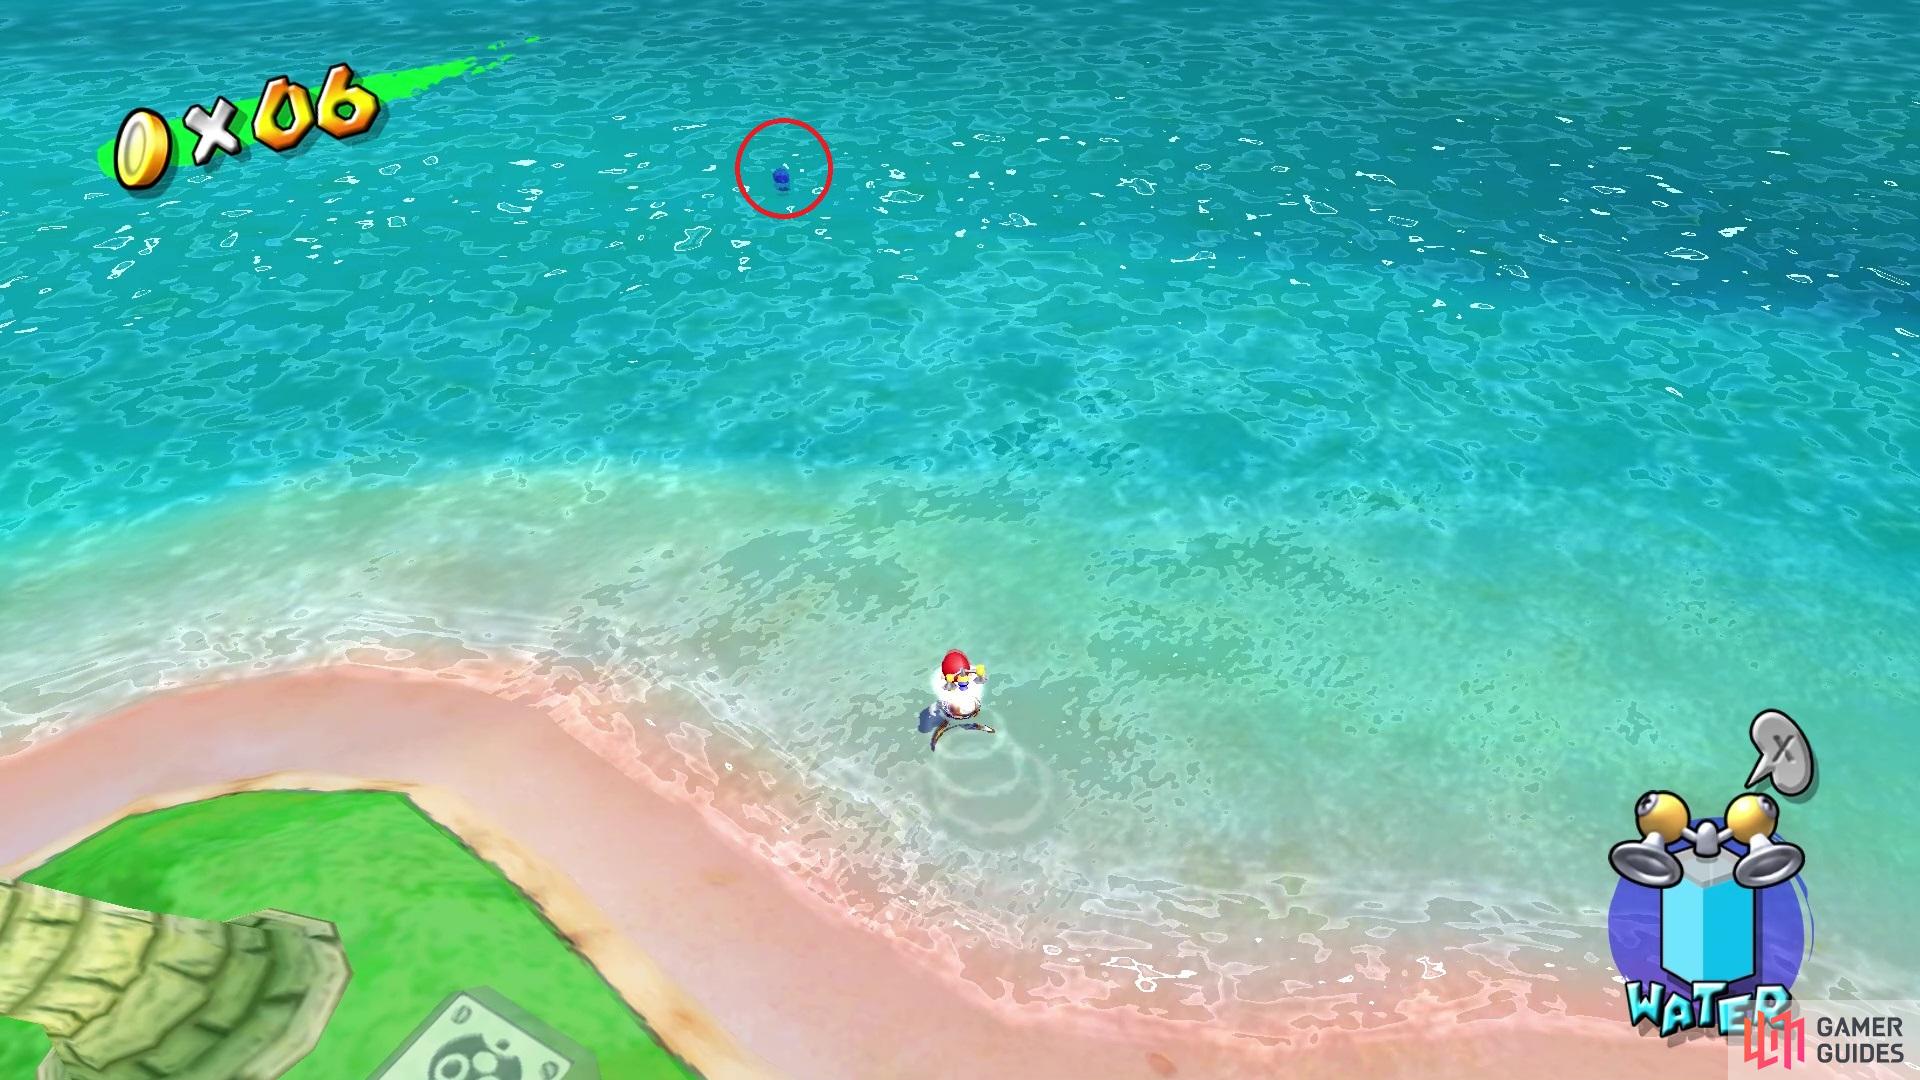 Blue Coin #10 is in the water by the island